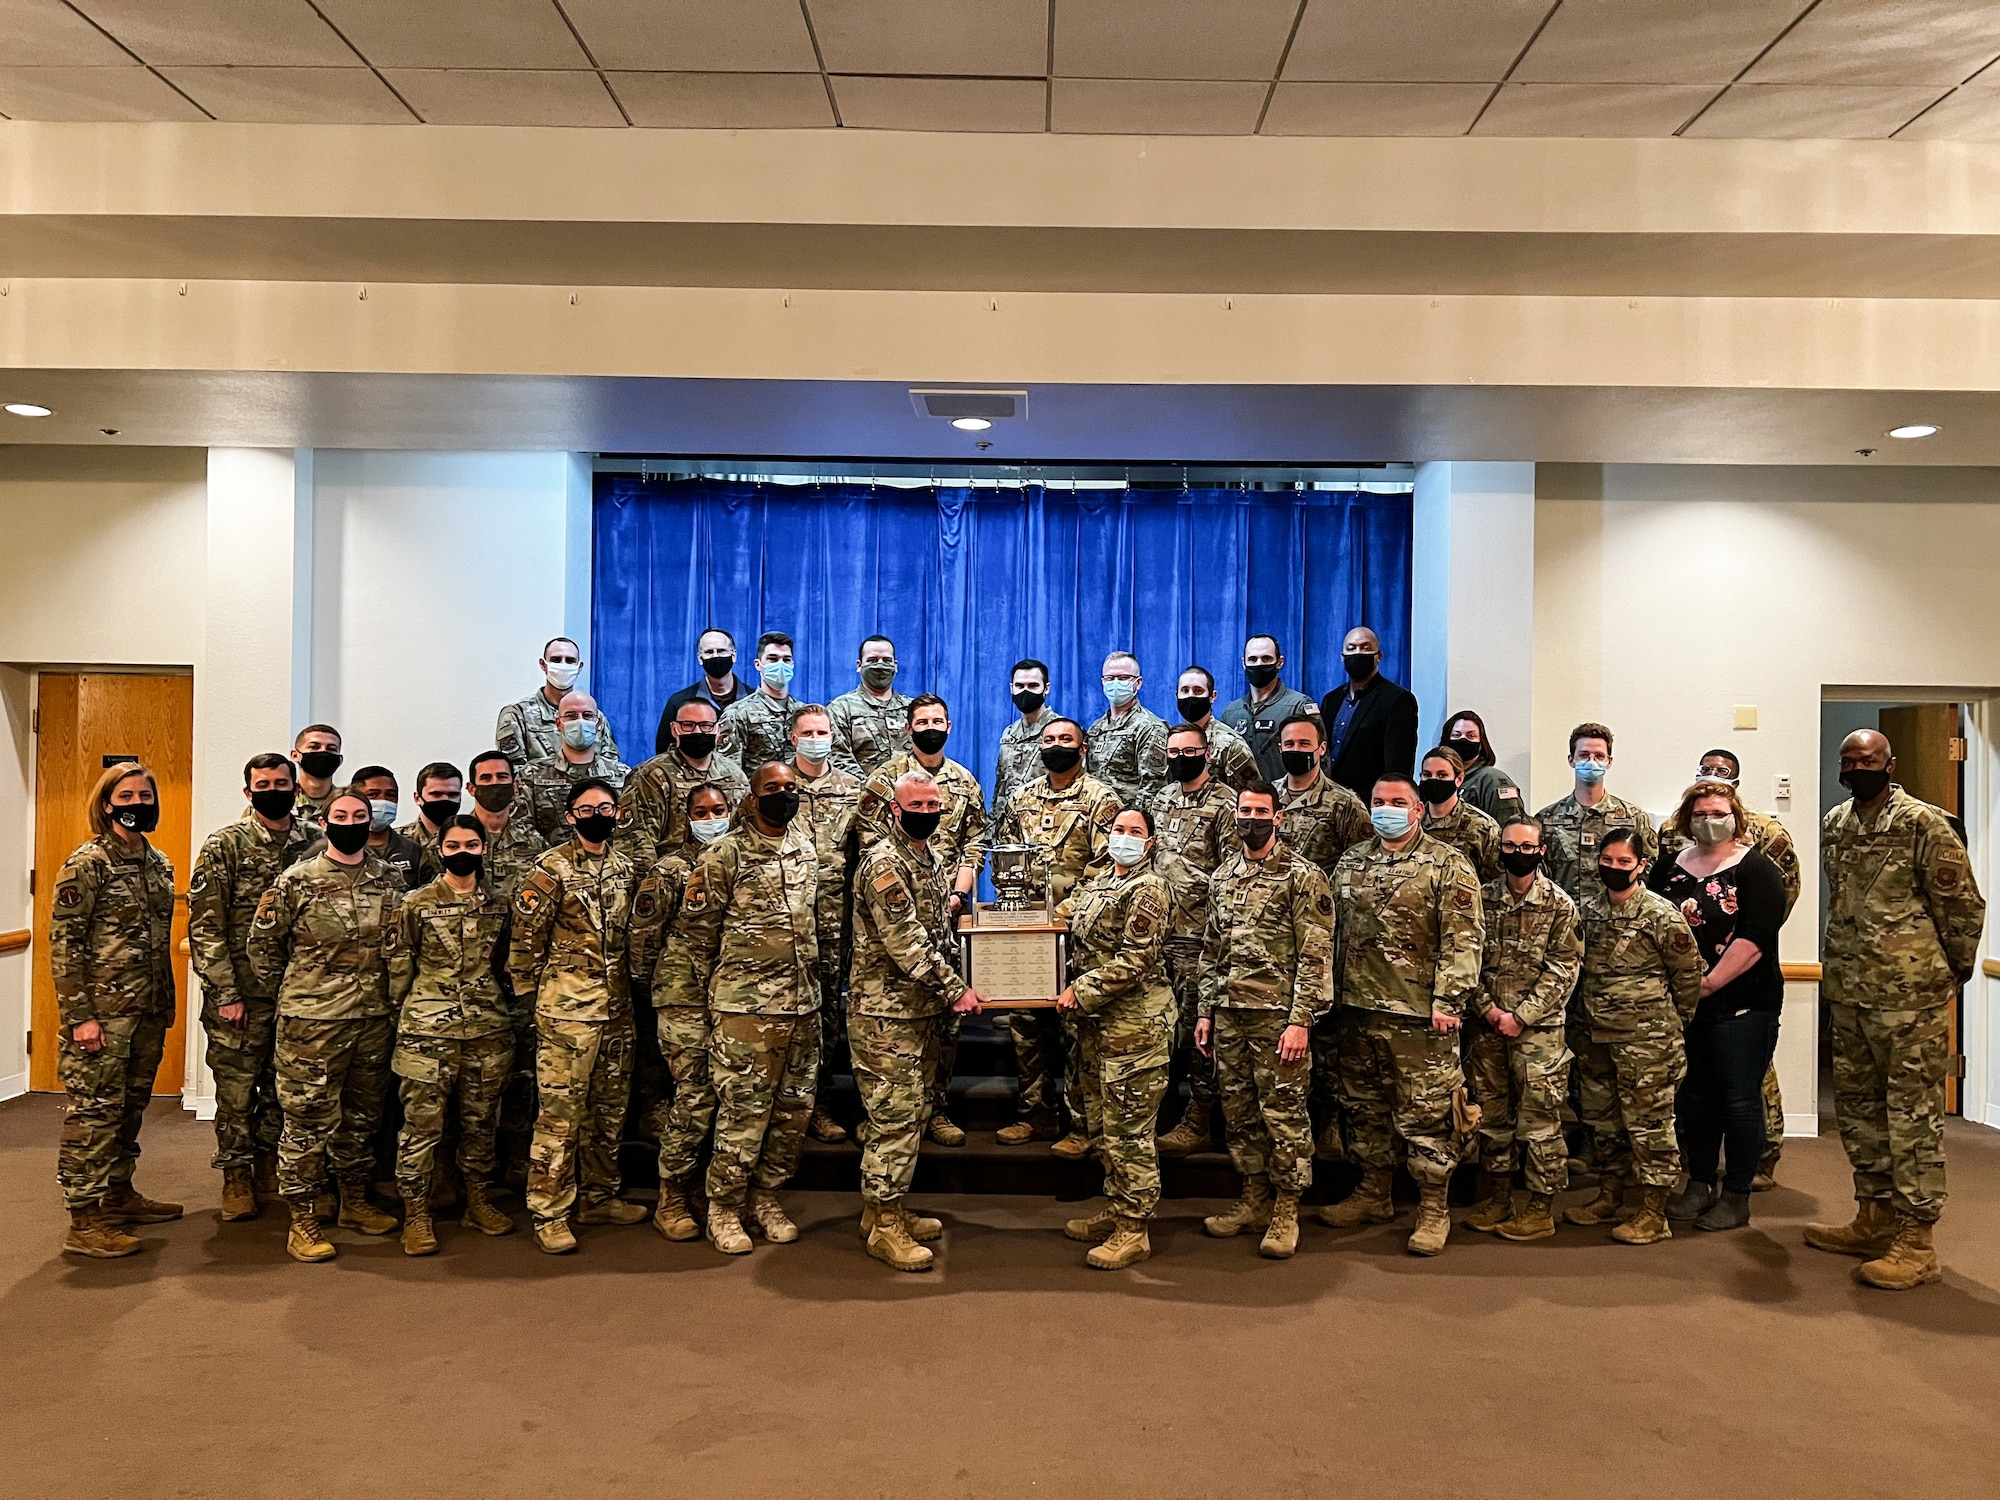 The Airmen of the 90th Operations Support Squadron pose for a group photo while holding the Col. Lowell F. McAdoo Award for the most outstanding intercontinental ballistic missile operations for 2020 on F.E. Warren Air Force Base, Wyoming, Nov. 23. 2021. The squadron earned this by executing 364 nuclear orders and 8,700 alert hours during the pandemic. Also, they organized and led the Air Force's first and only drive-in airshow with 4,500 people in attendance while ensuring the health and safety of its spectators. (U.S. Air Force photo by Joseph Coslett)